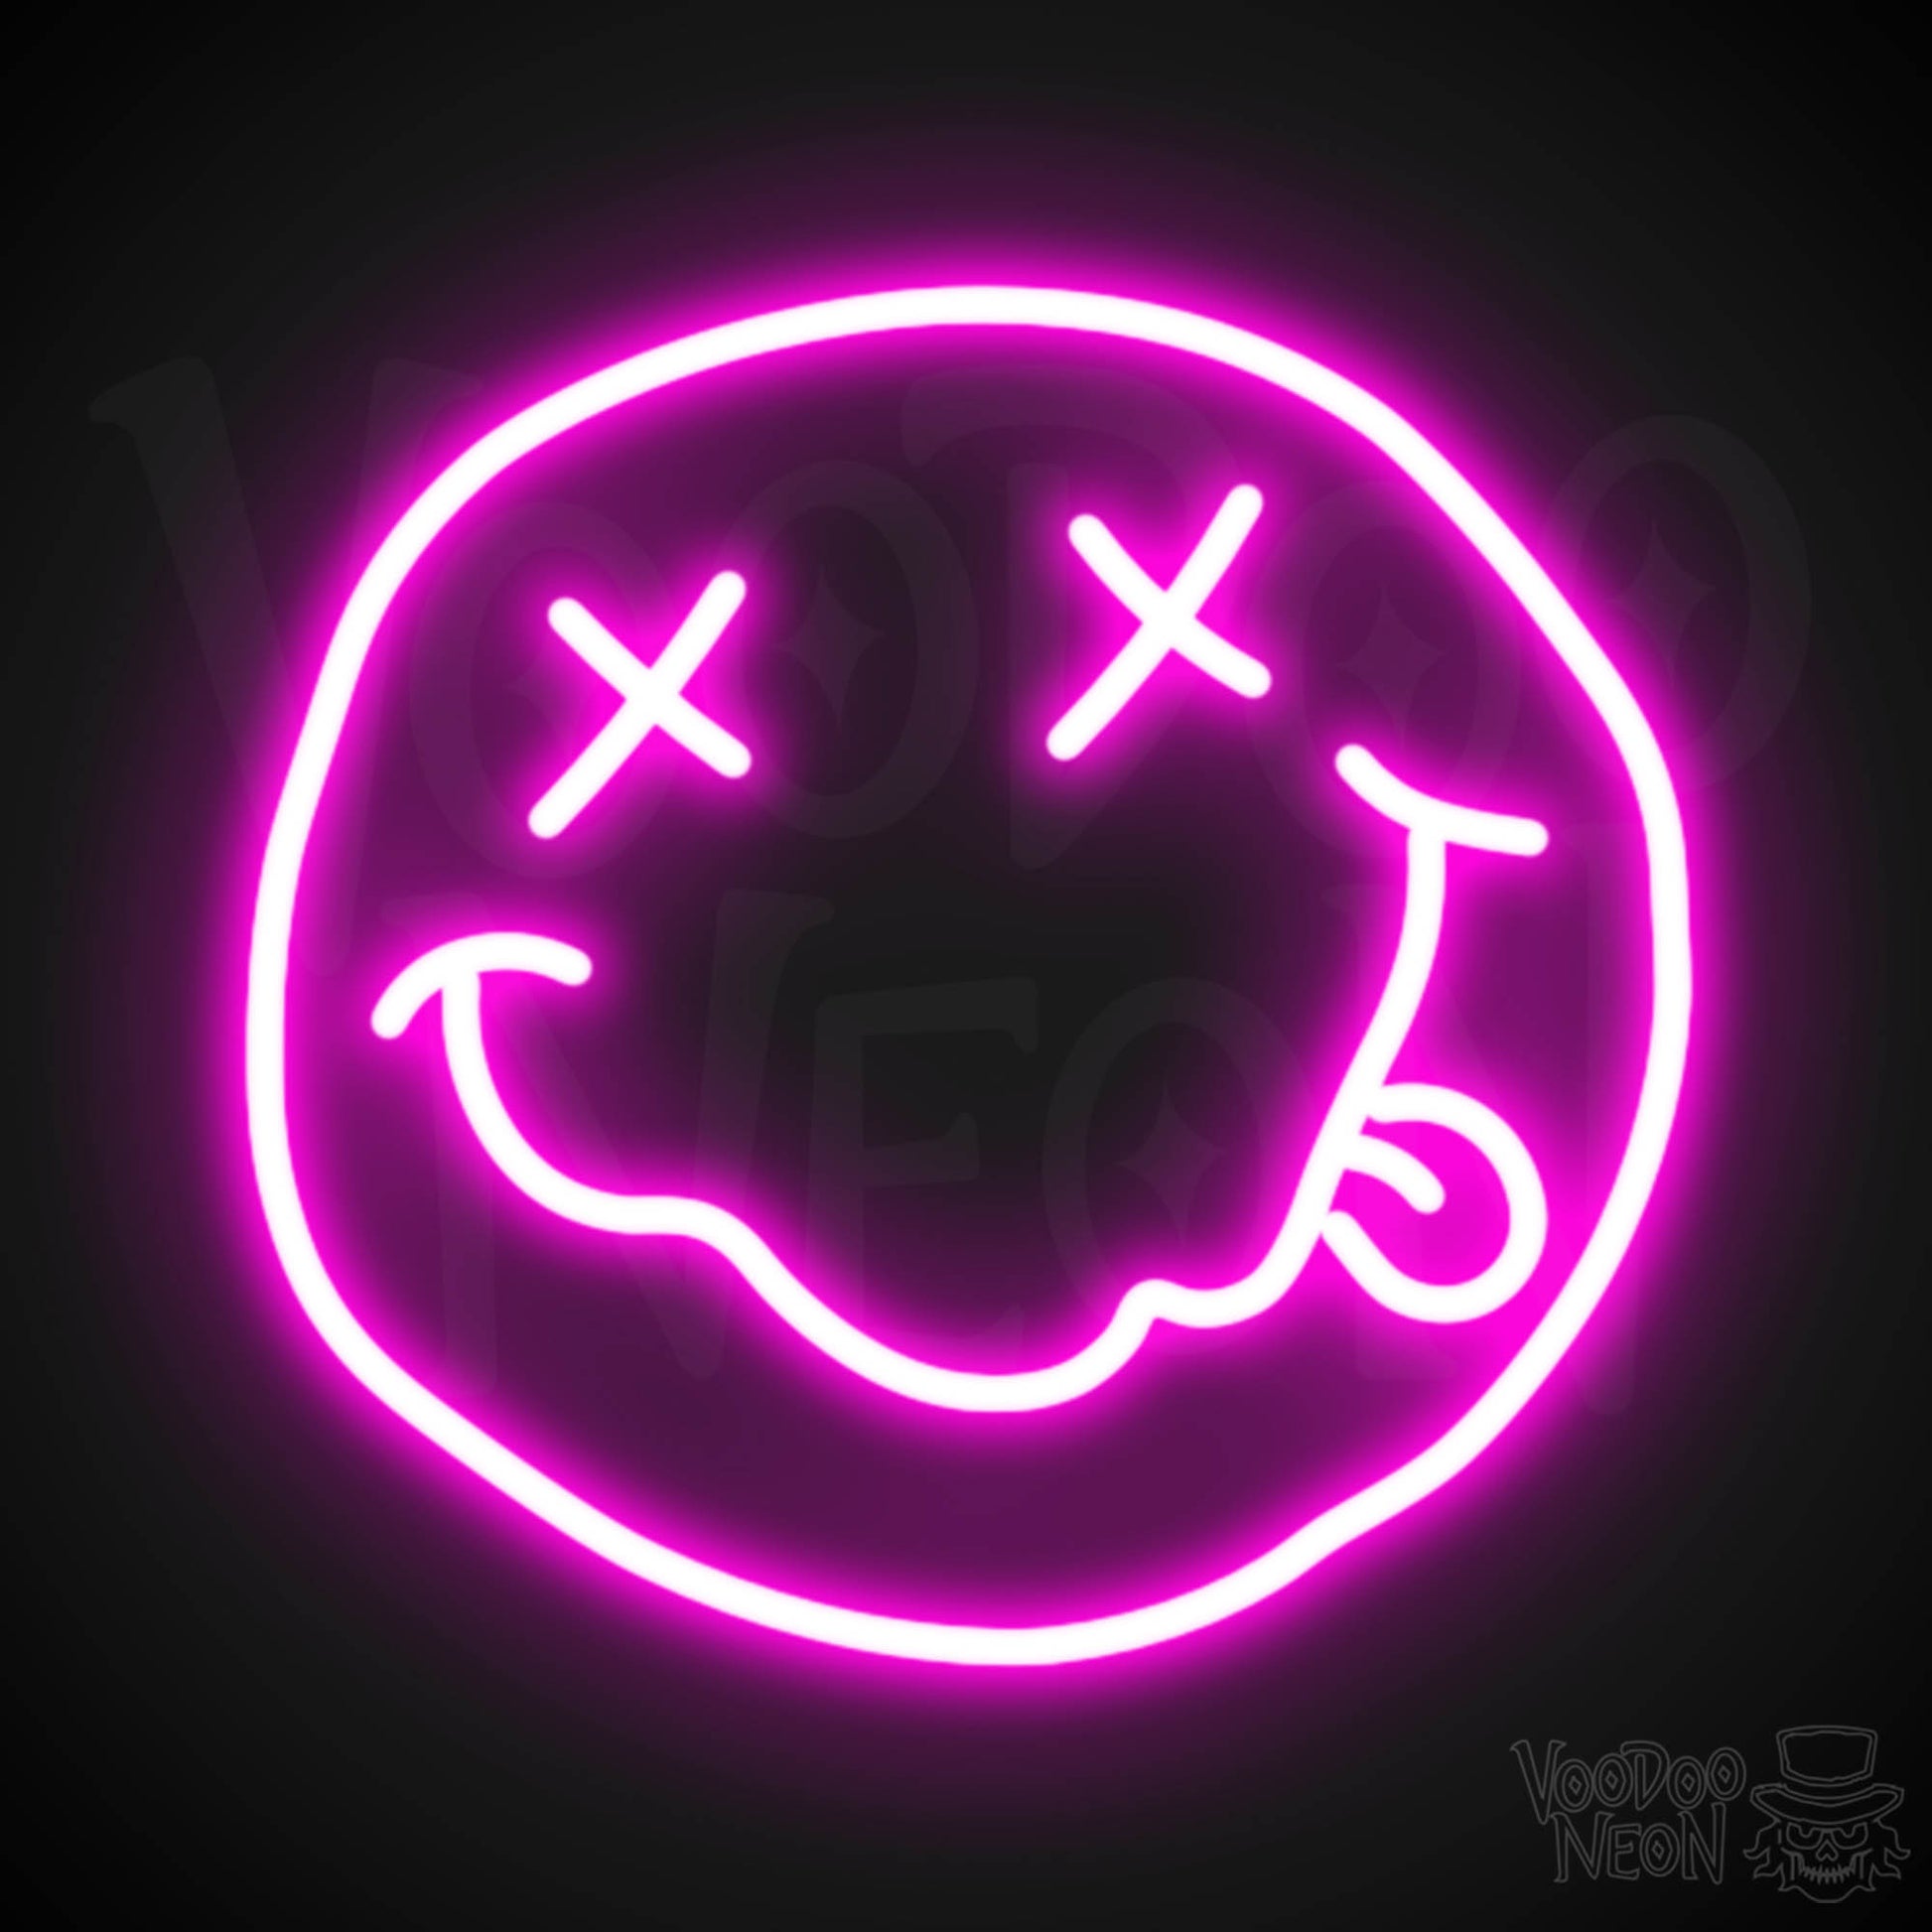 Nirvana Neon Sign - Nirvana Sign - Neon Nirvana Logo Wall Art - Color Pink